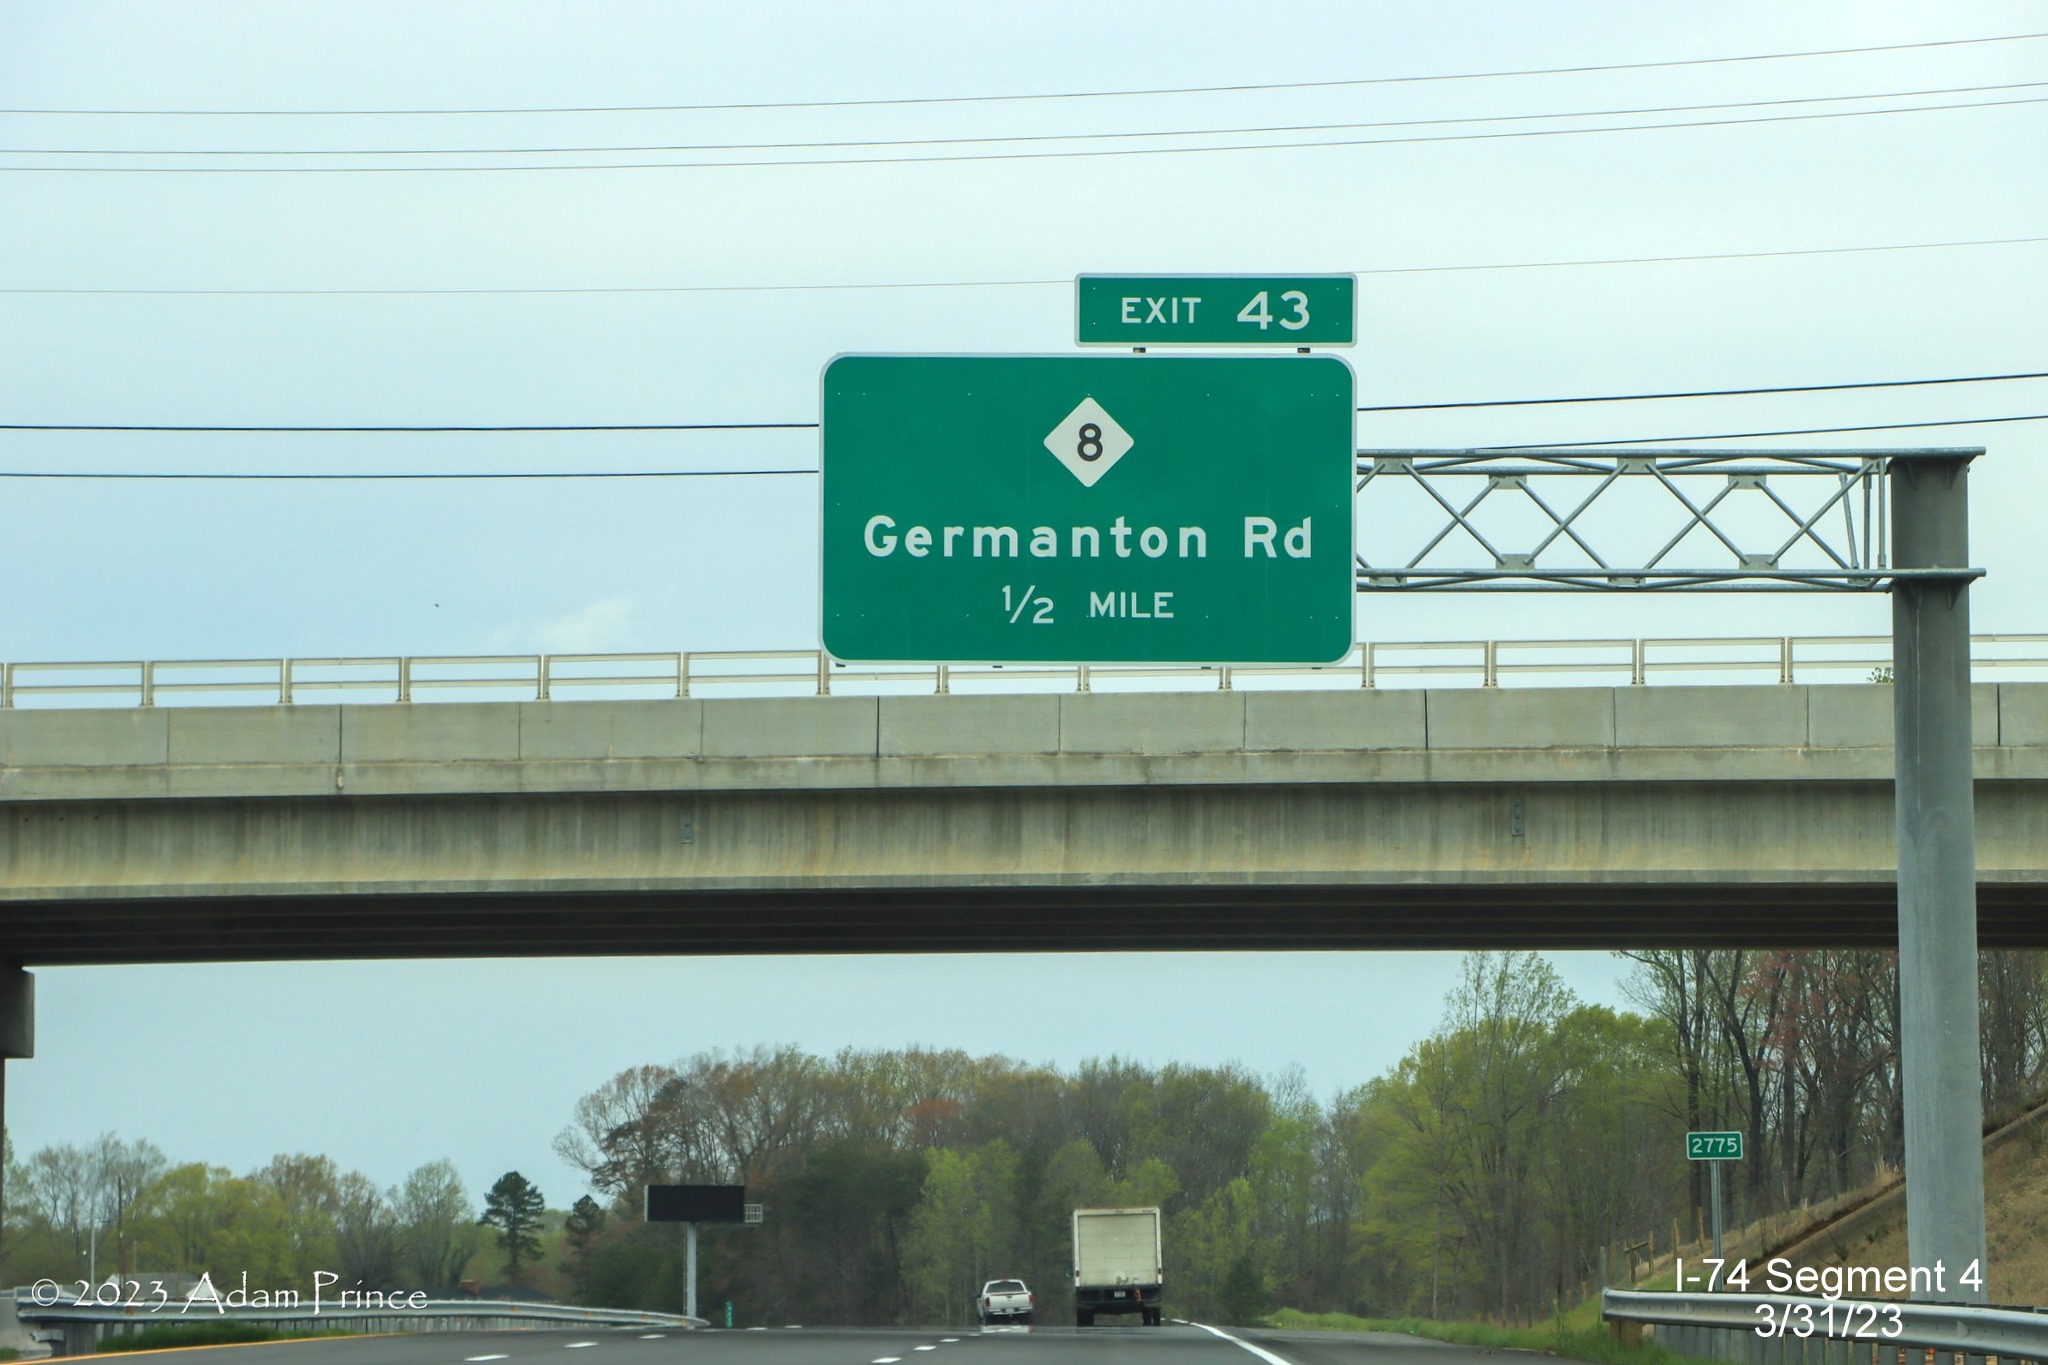 Image of 1 Mile advance sign for NC 8/Germanton Road exit on NC 74 (Future I-74) West/Winston-Salem 
        Northern Beltway, Adam Prince, March 2023